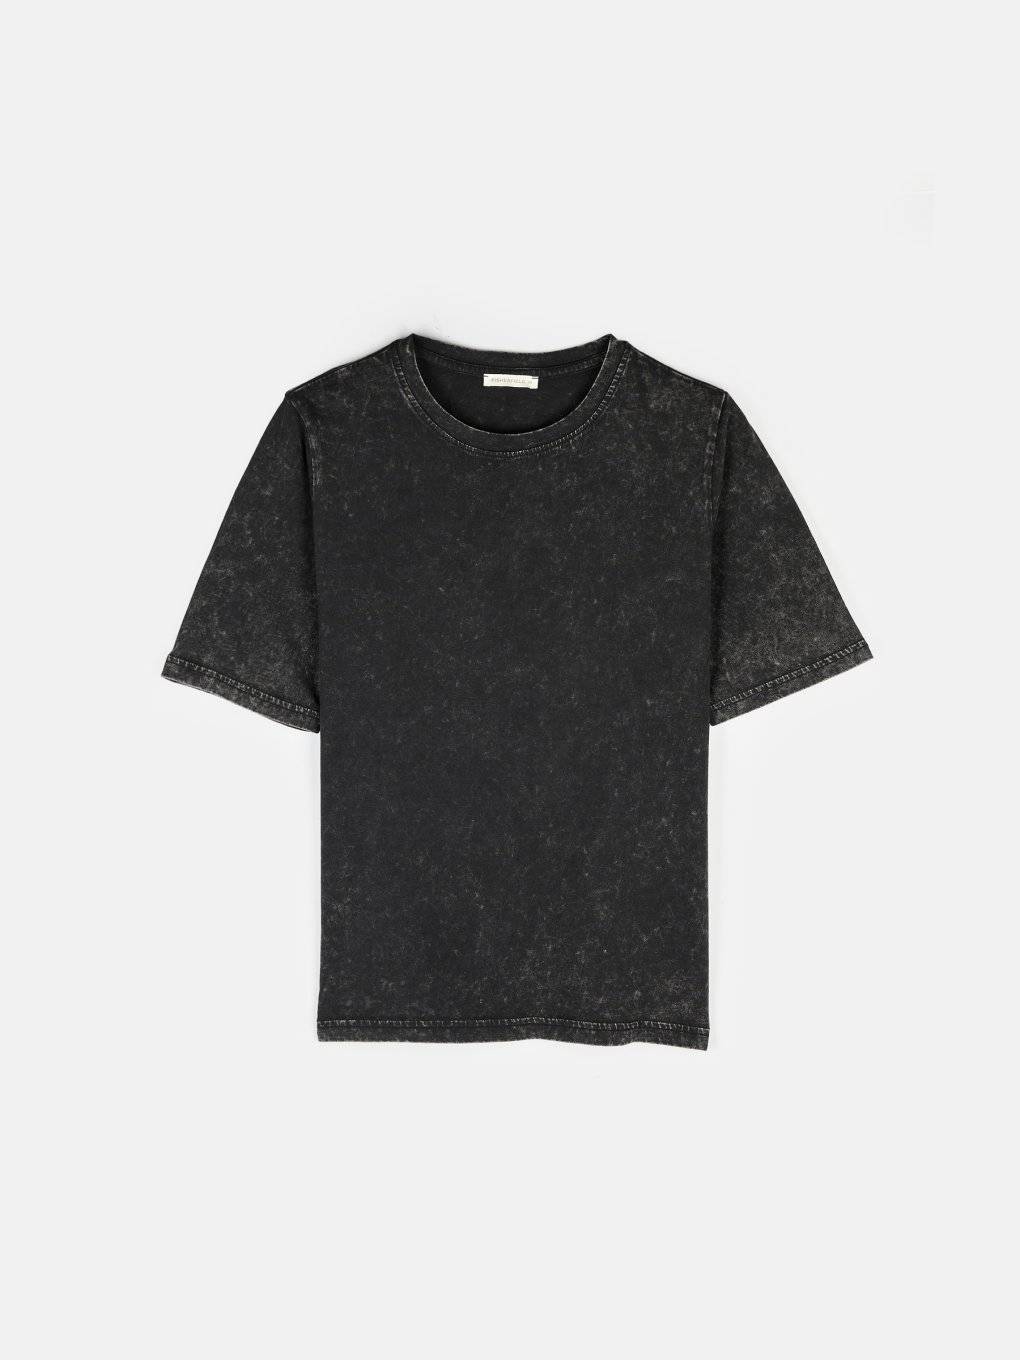 Washed out effect cotton t-shirt